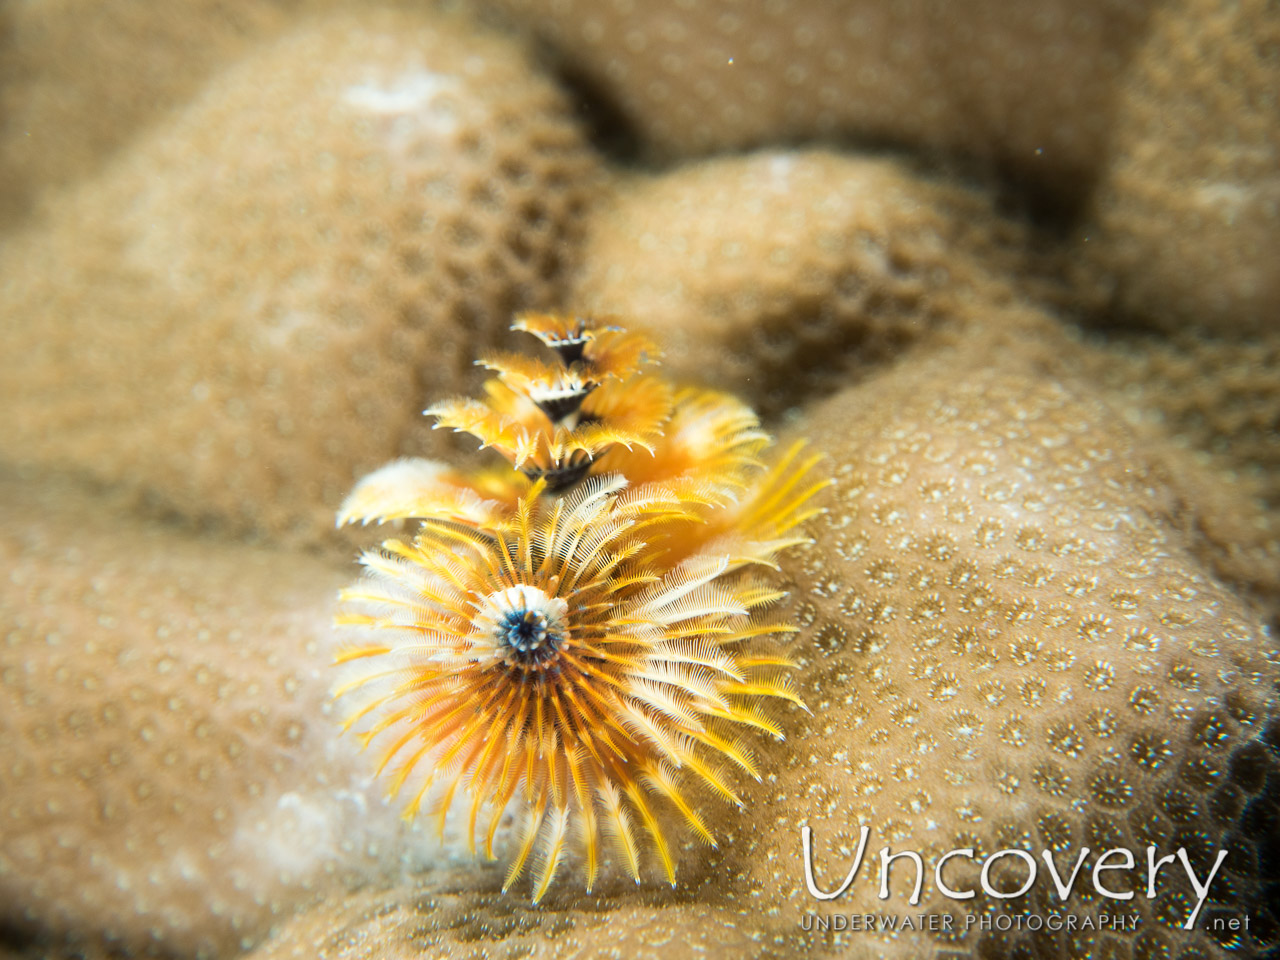 Christmas Tree Worm (spirobranchus Sp.), photo taken in Maldives, Male Atoll, North Male Atoll, Banana Reef